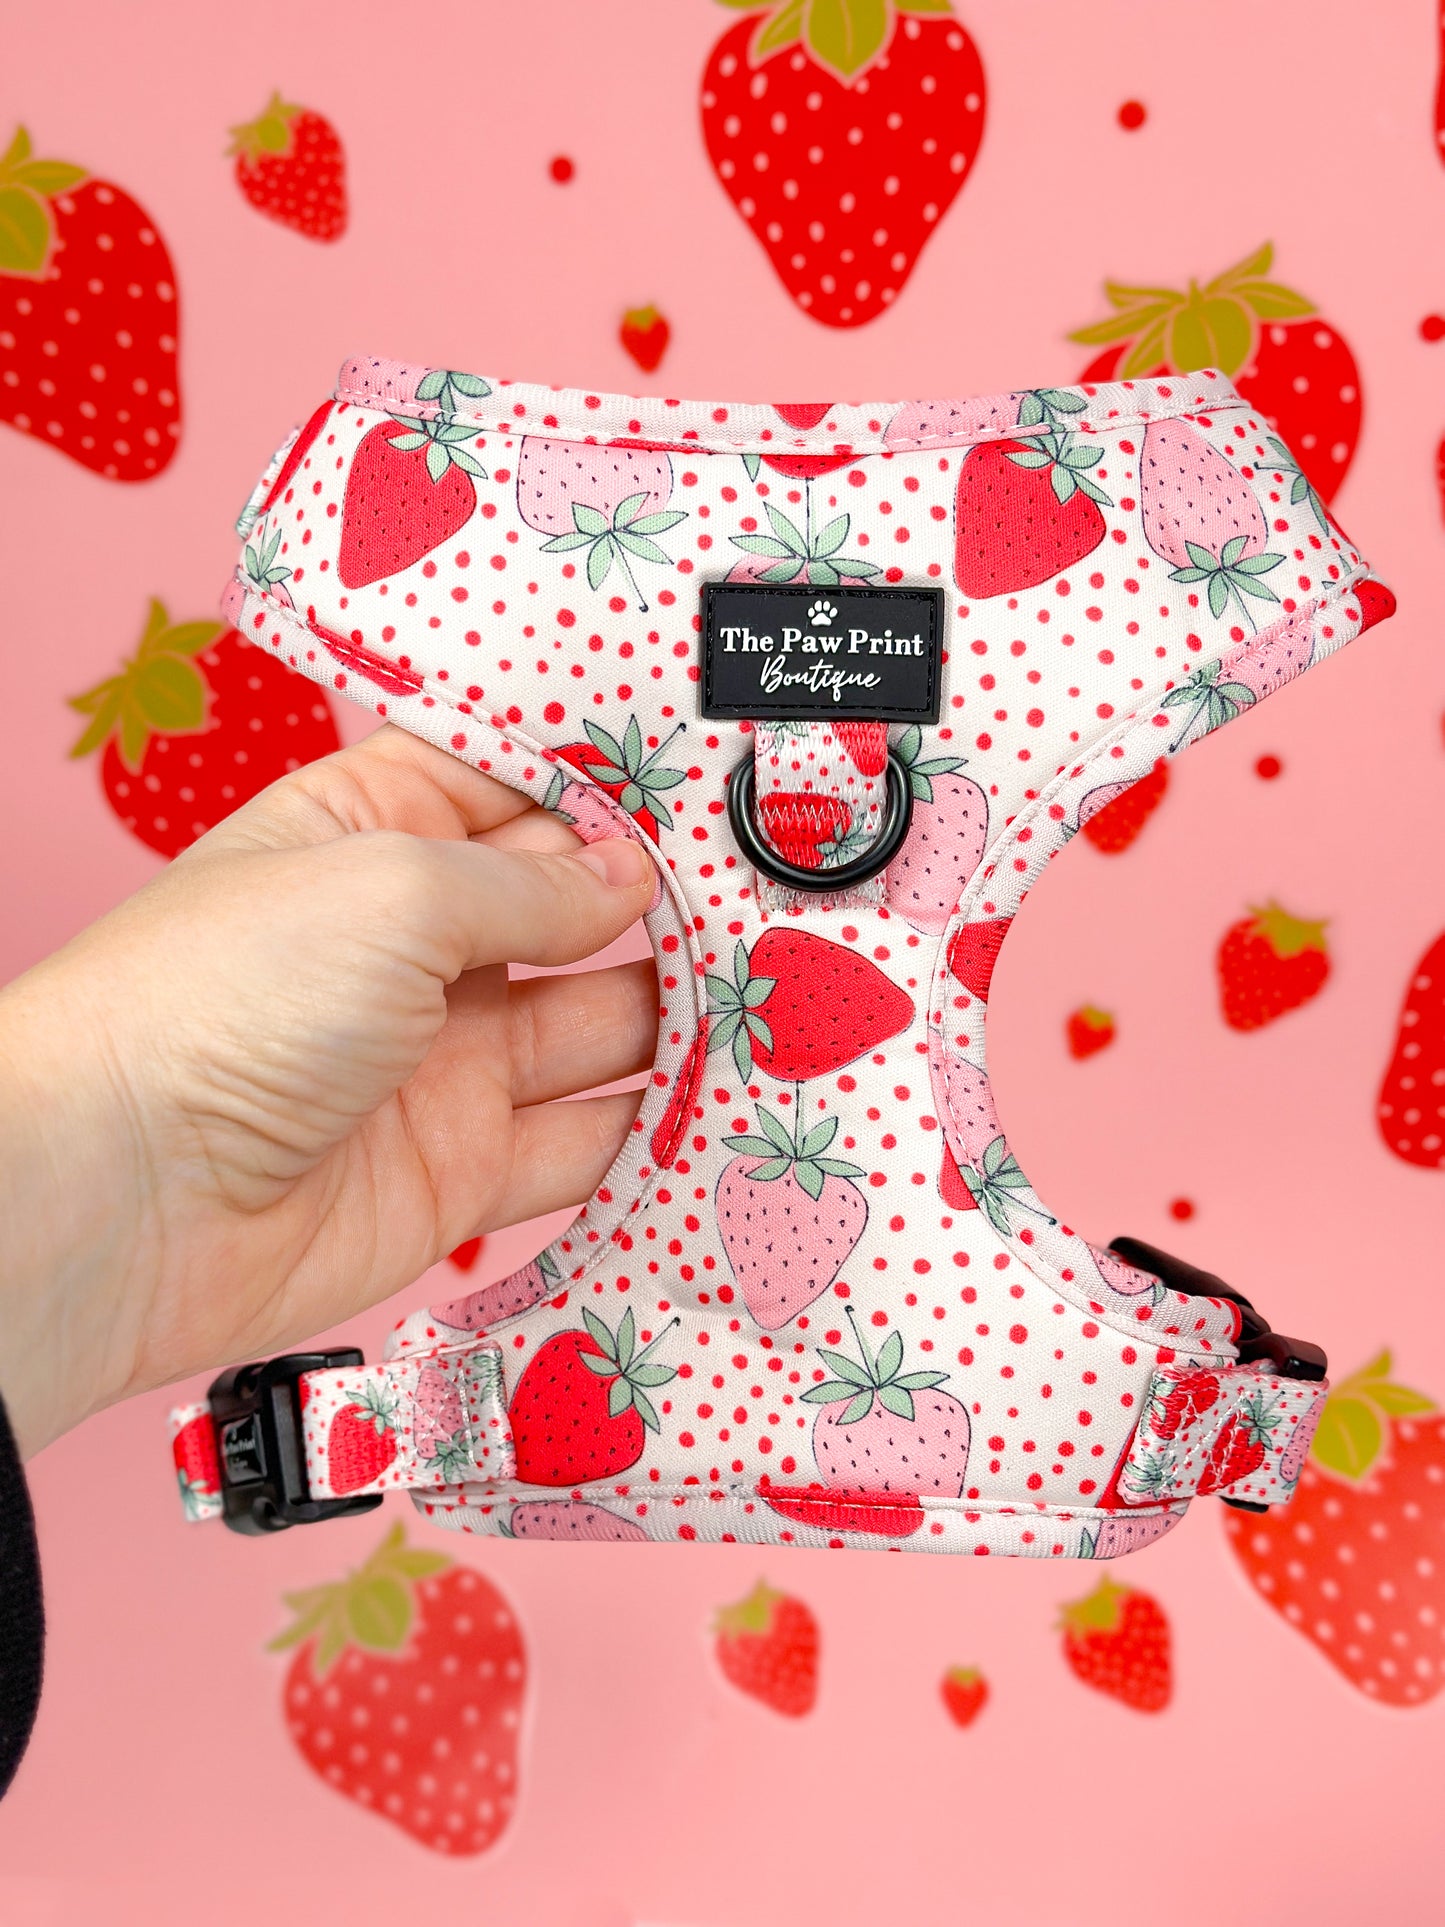 The Sweet Strawberries Harness